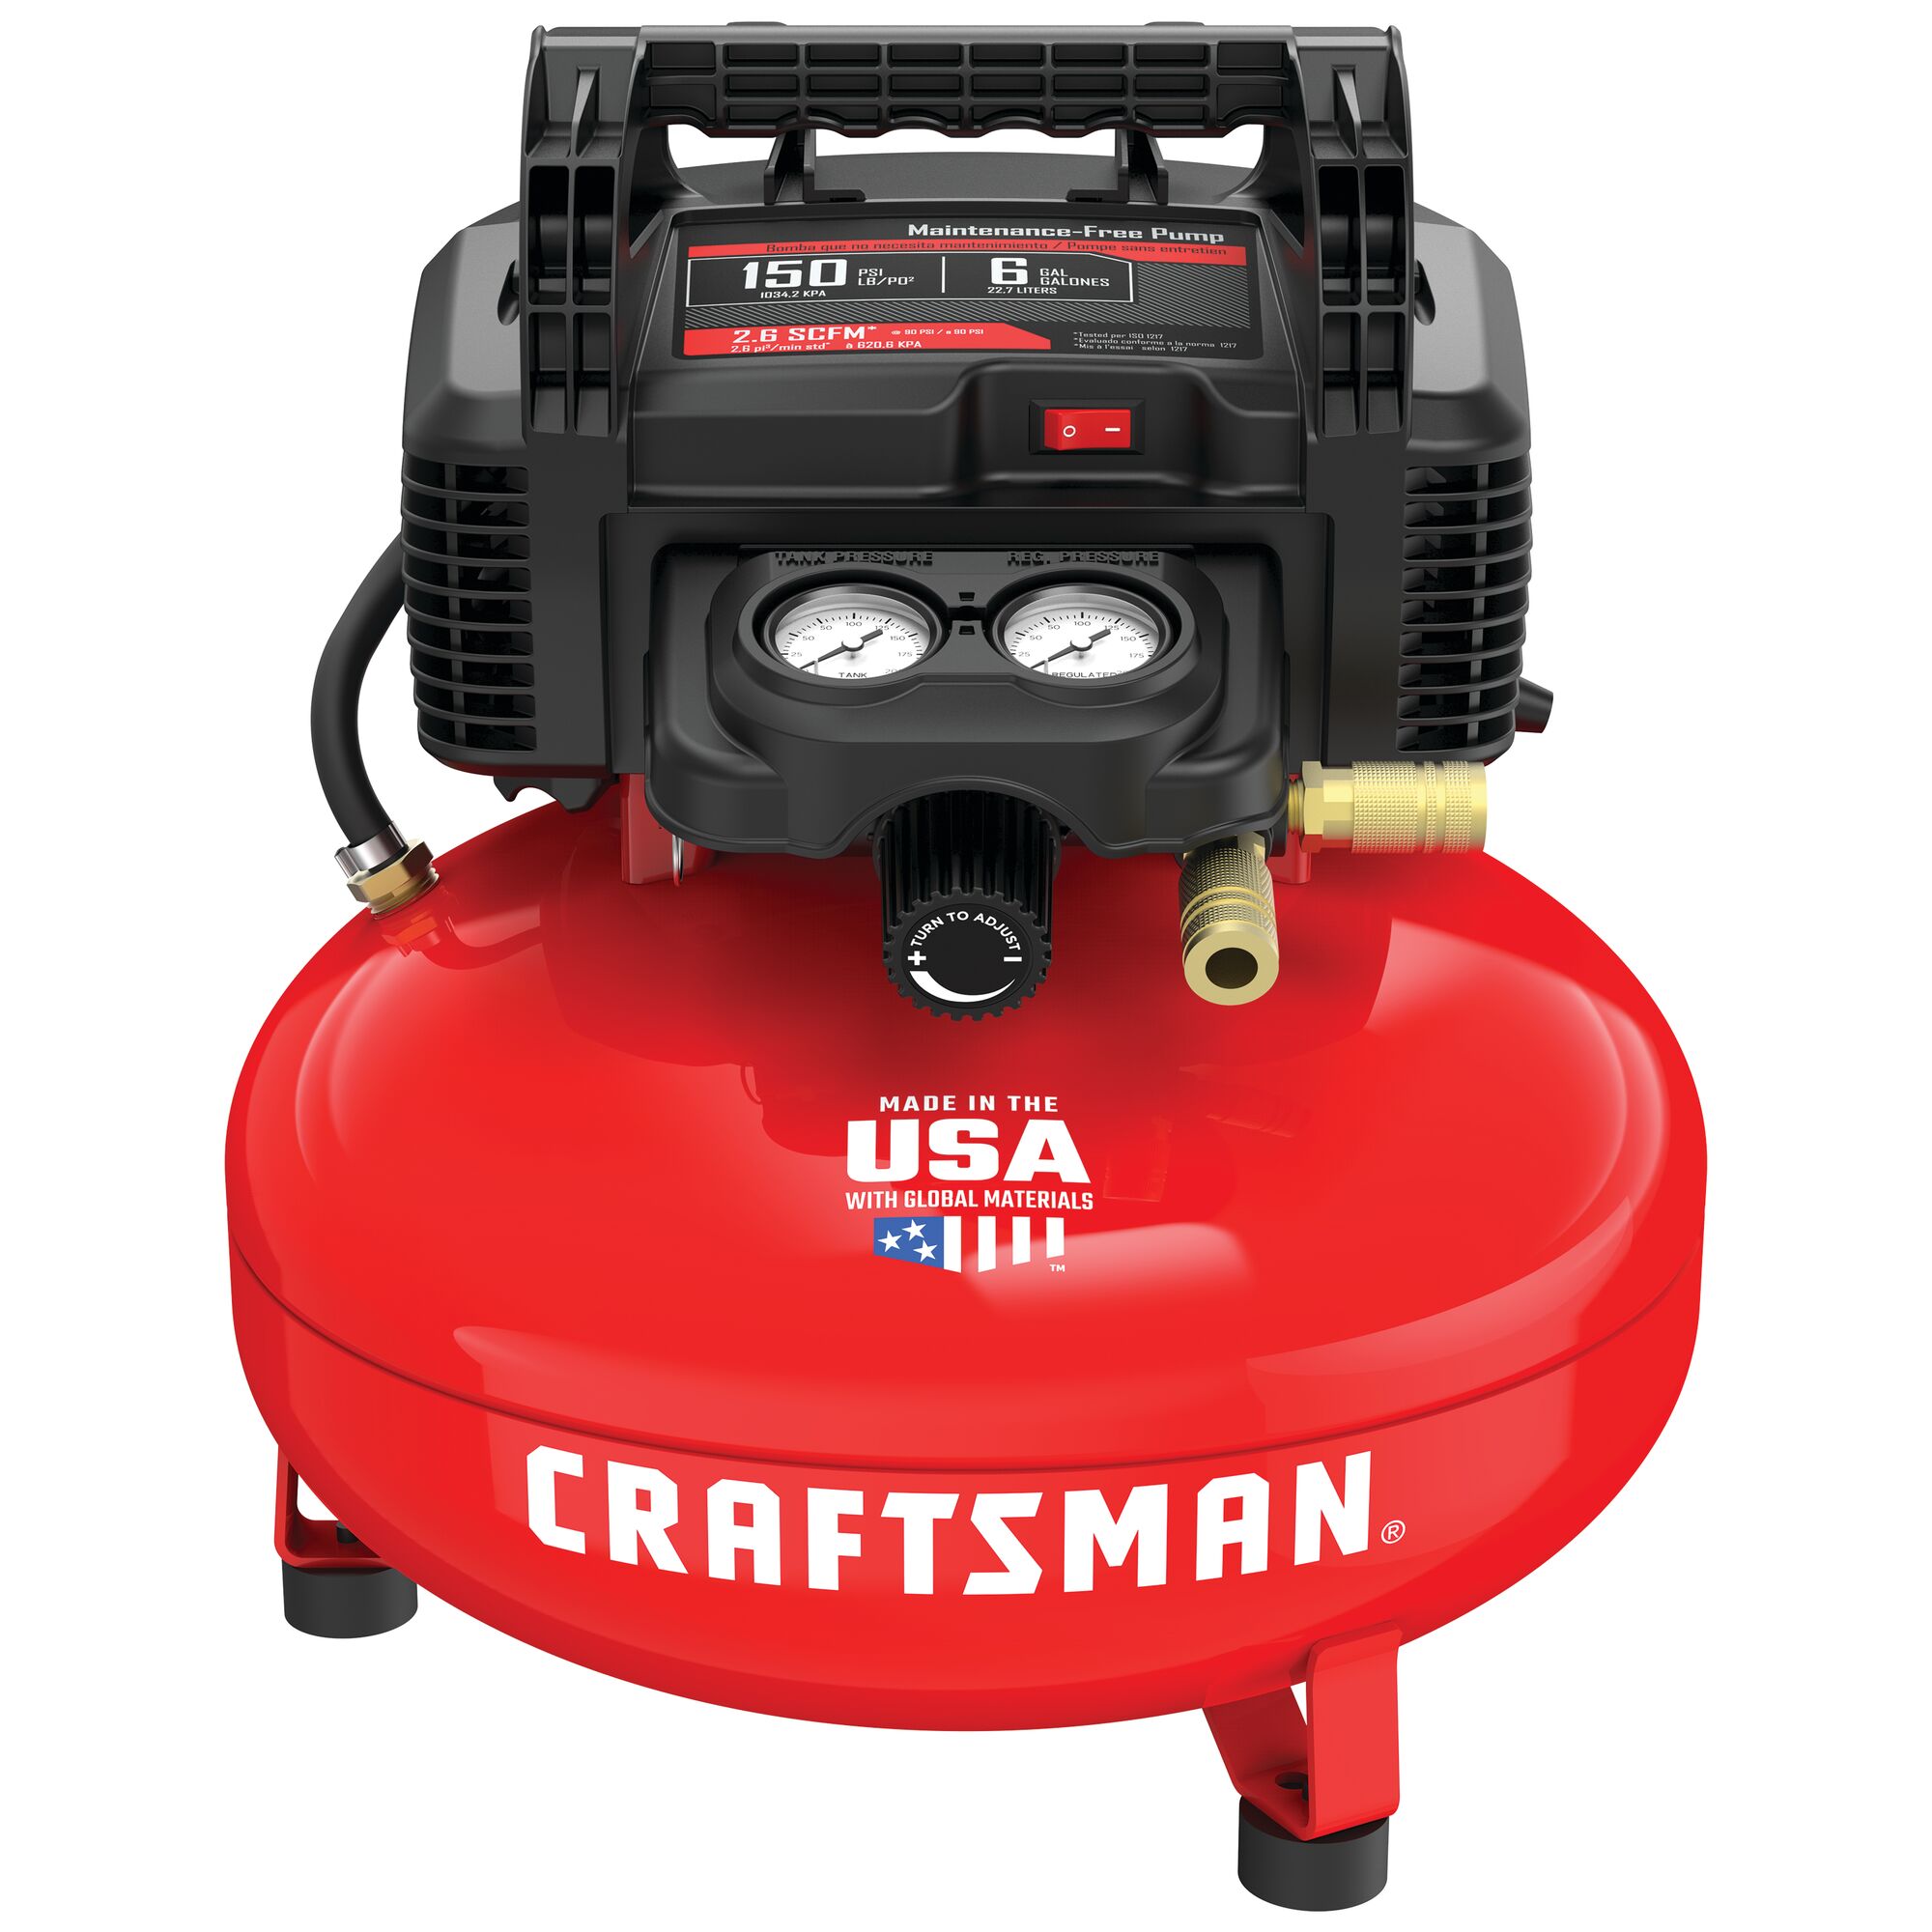 Craftsman 3hp Air Compressor Paint Sprayer Model # 919.15688, JR Sales  Ammo & Estate Sale: Tools, General Merchandise, Household Items,  Photography & Lighting, Audio & Video, Formerly SACS